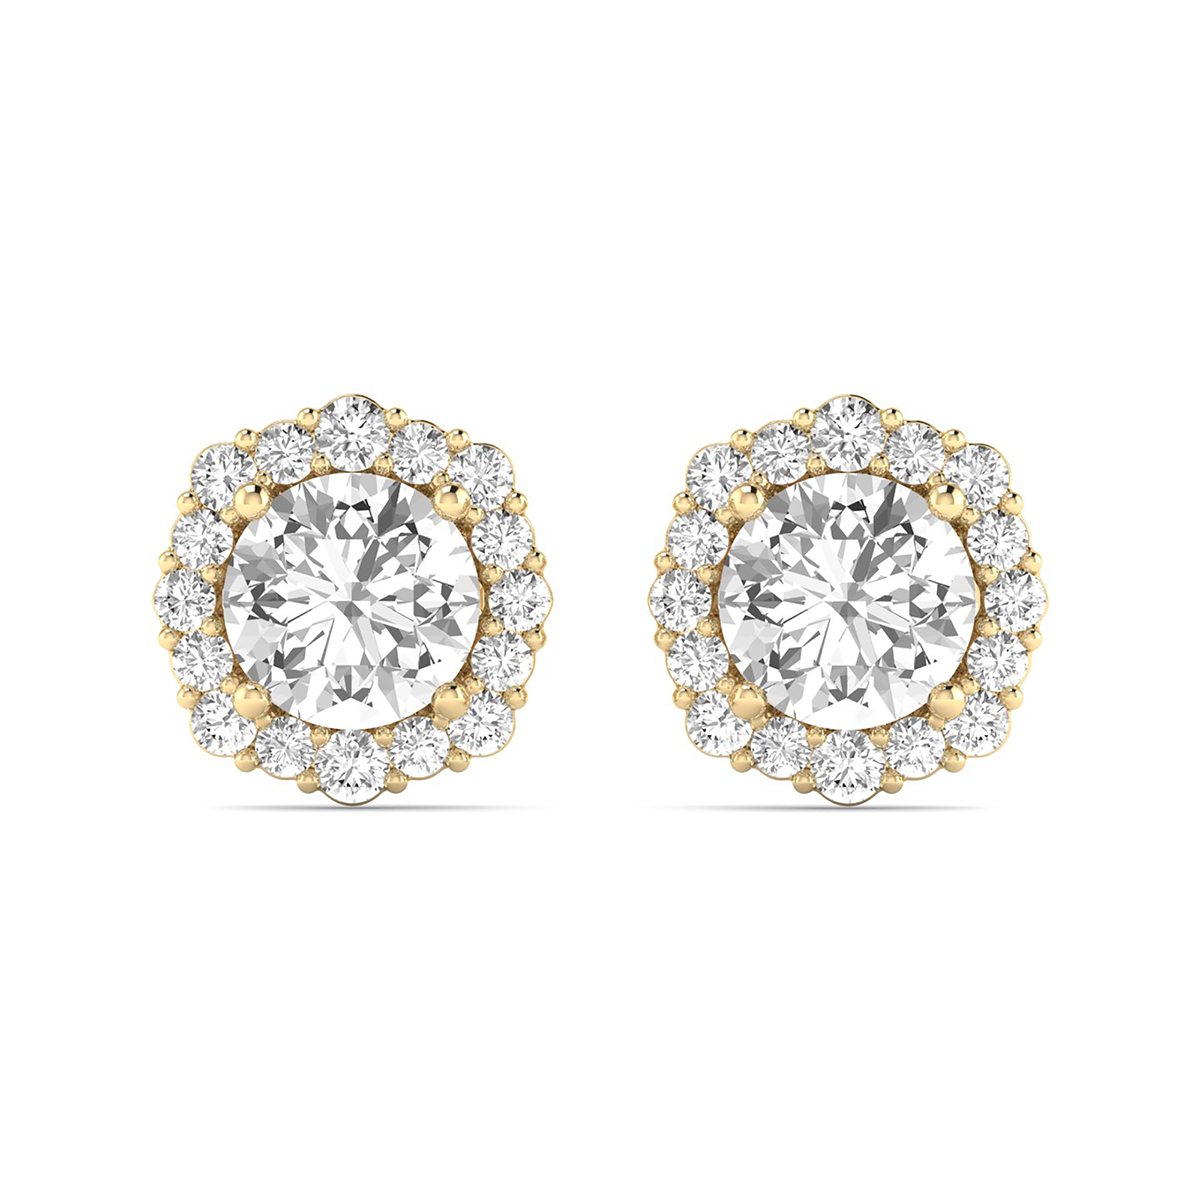 Image of 3/4 Carat TW Floral Halo Diamond Stud Earrings in 14K Yellow Gold